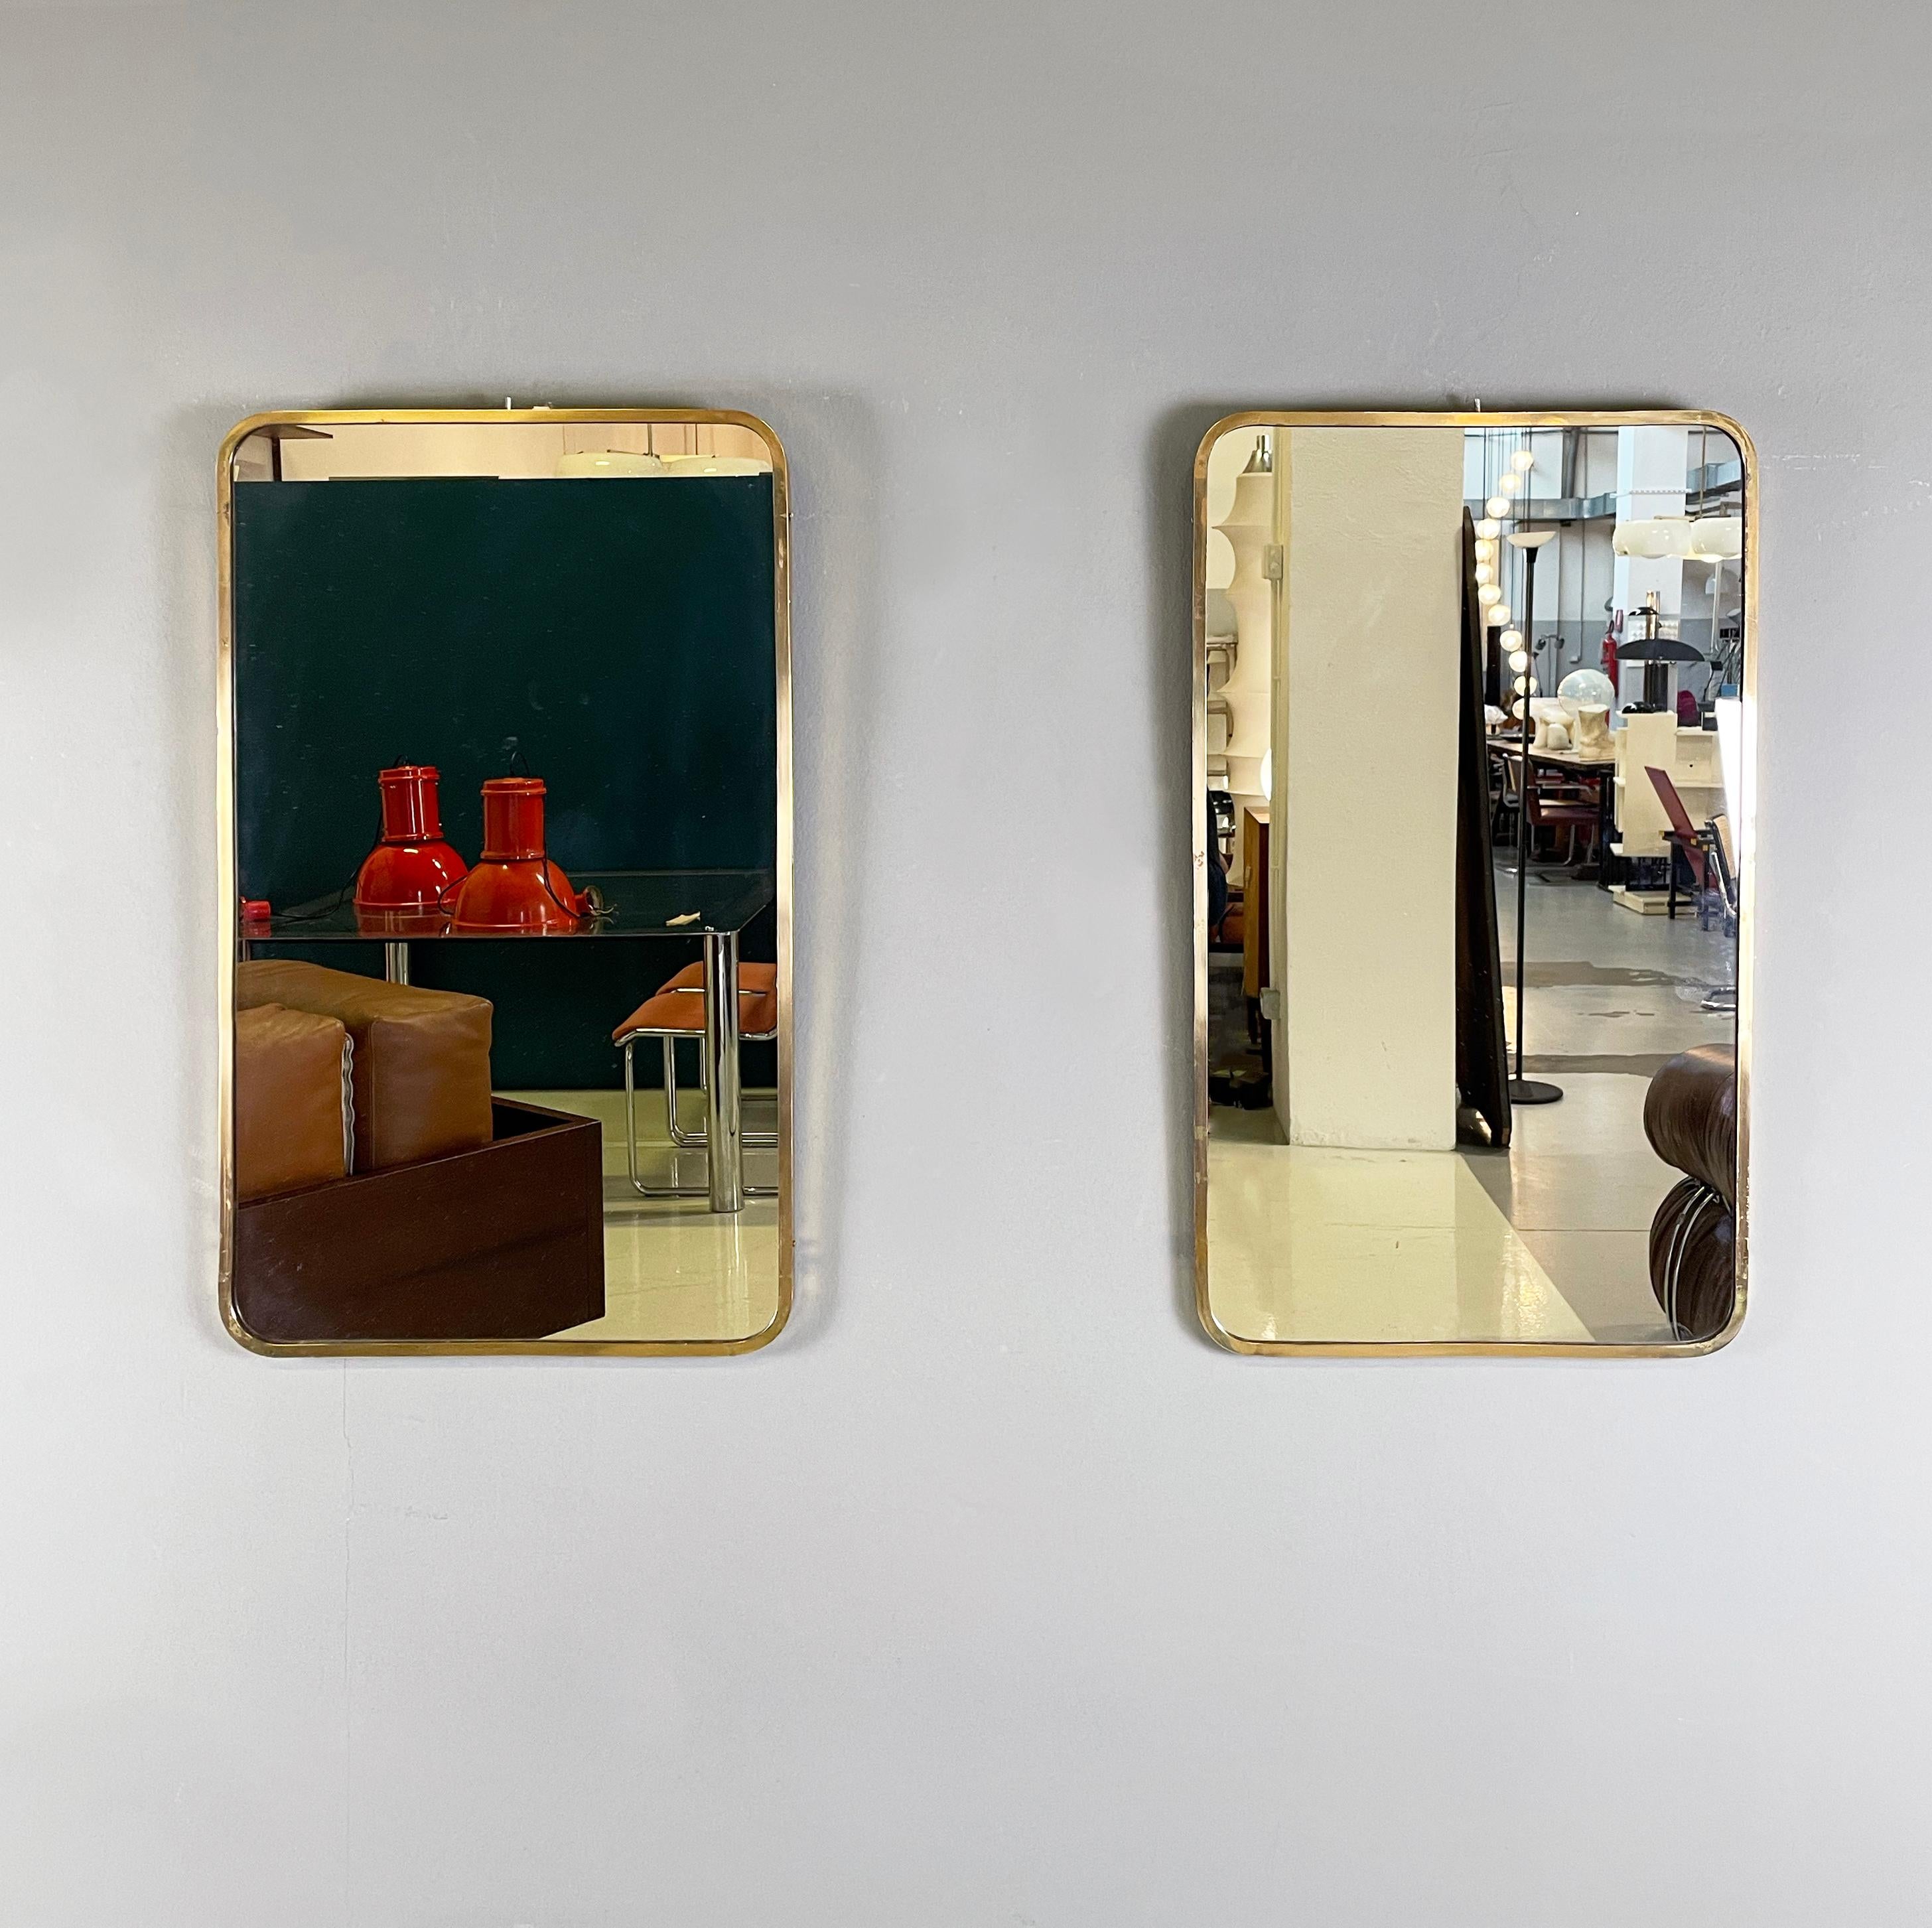 Italian mid-century modern Wall mirrors in brass frame, 1950s
Pair of rectangular wall mirrors with rounded corners in a brass frame. The structure behind the mirror is made of wood. At the top it has a hook for hanging.
1950s.
Vintage condition,